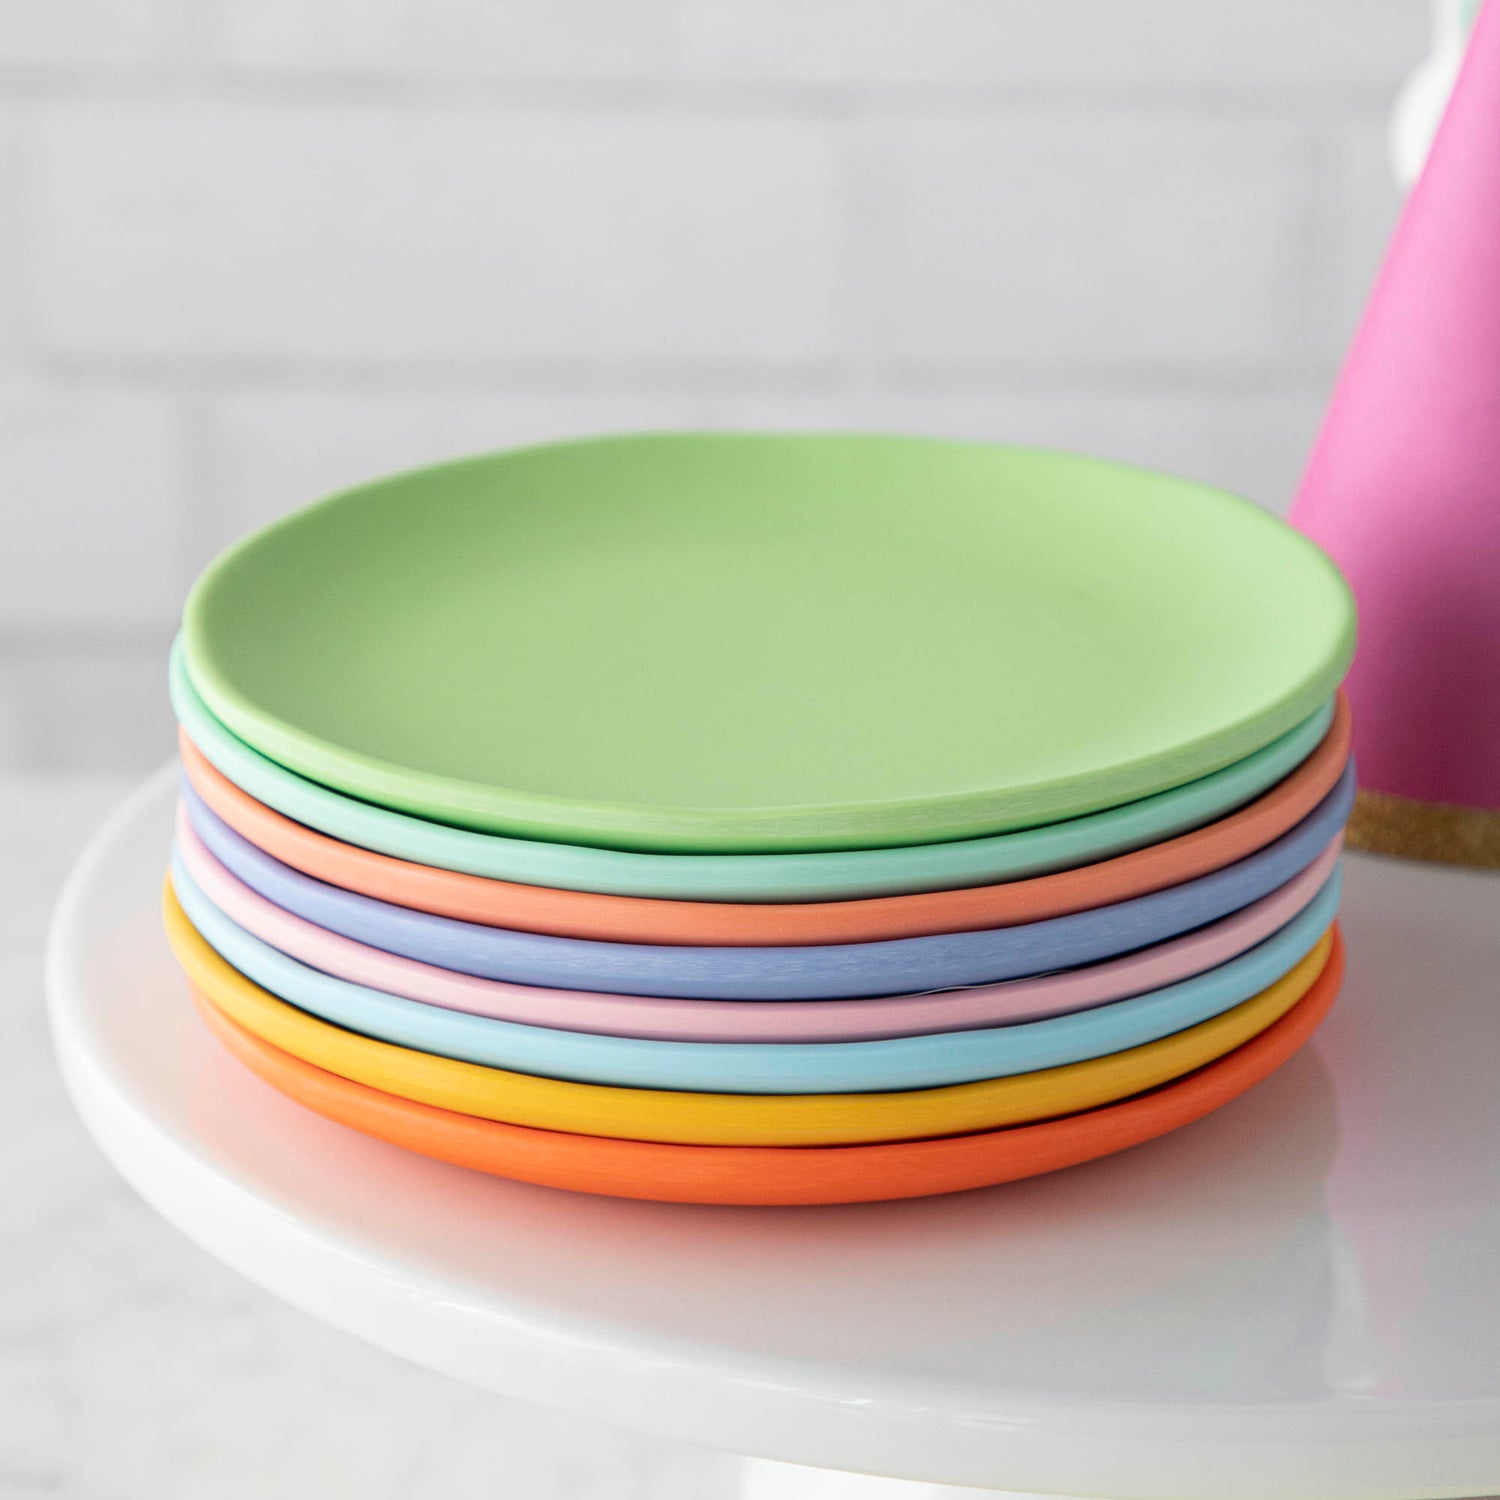 A stack of colorful plates on a cake plate.